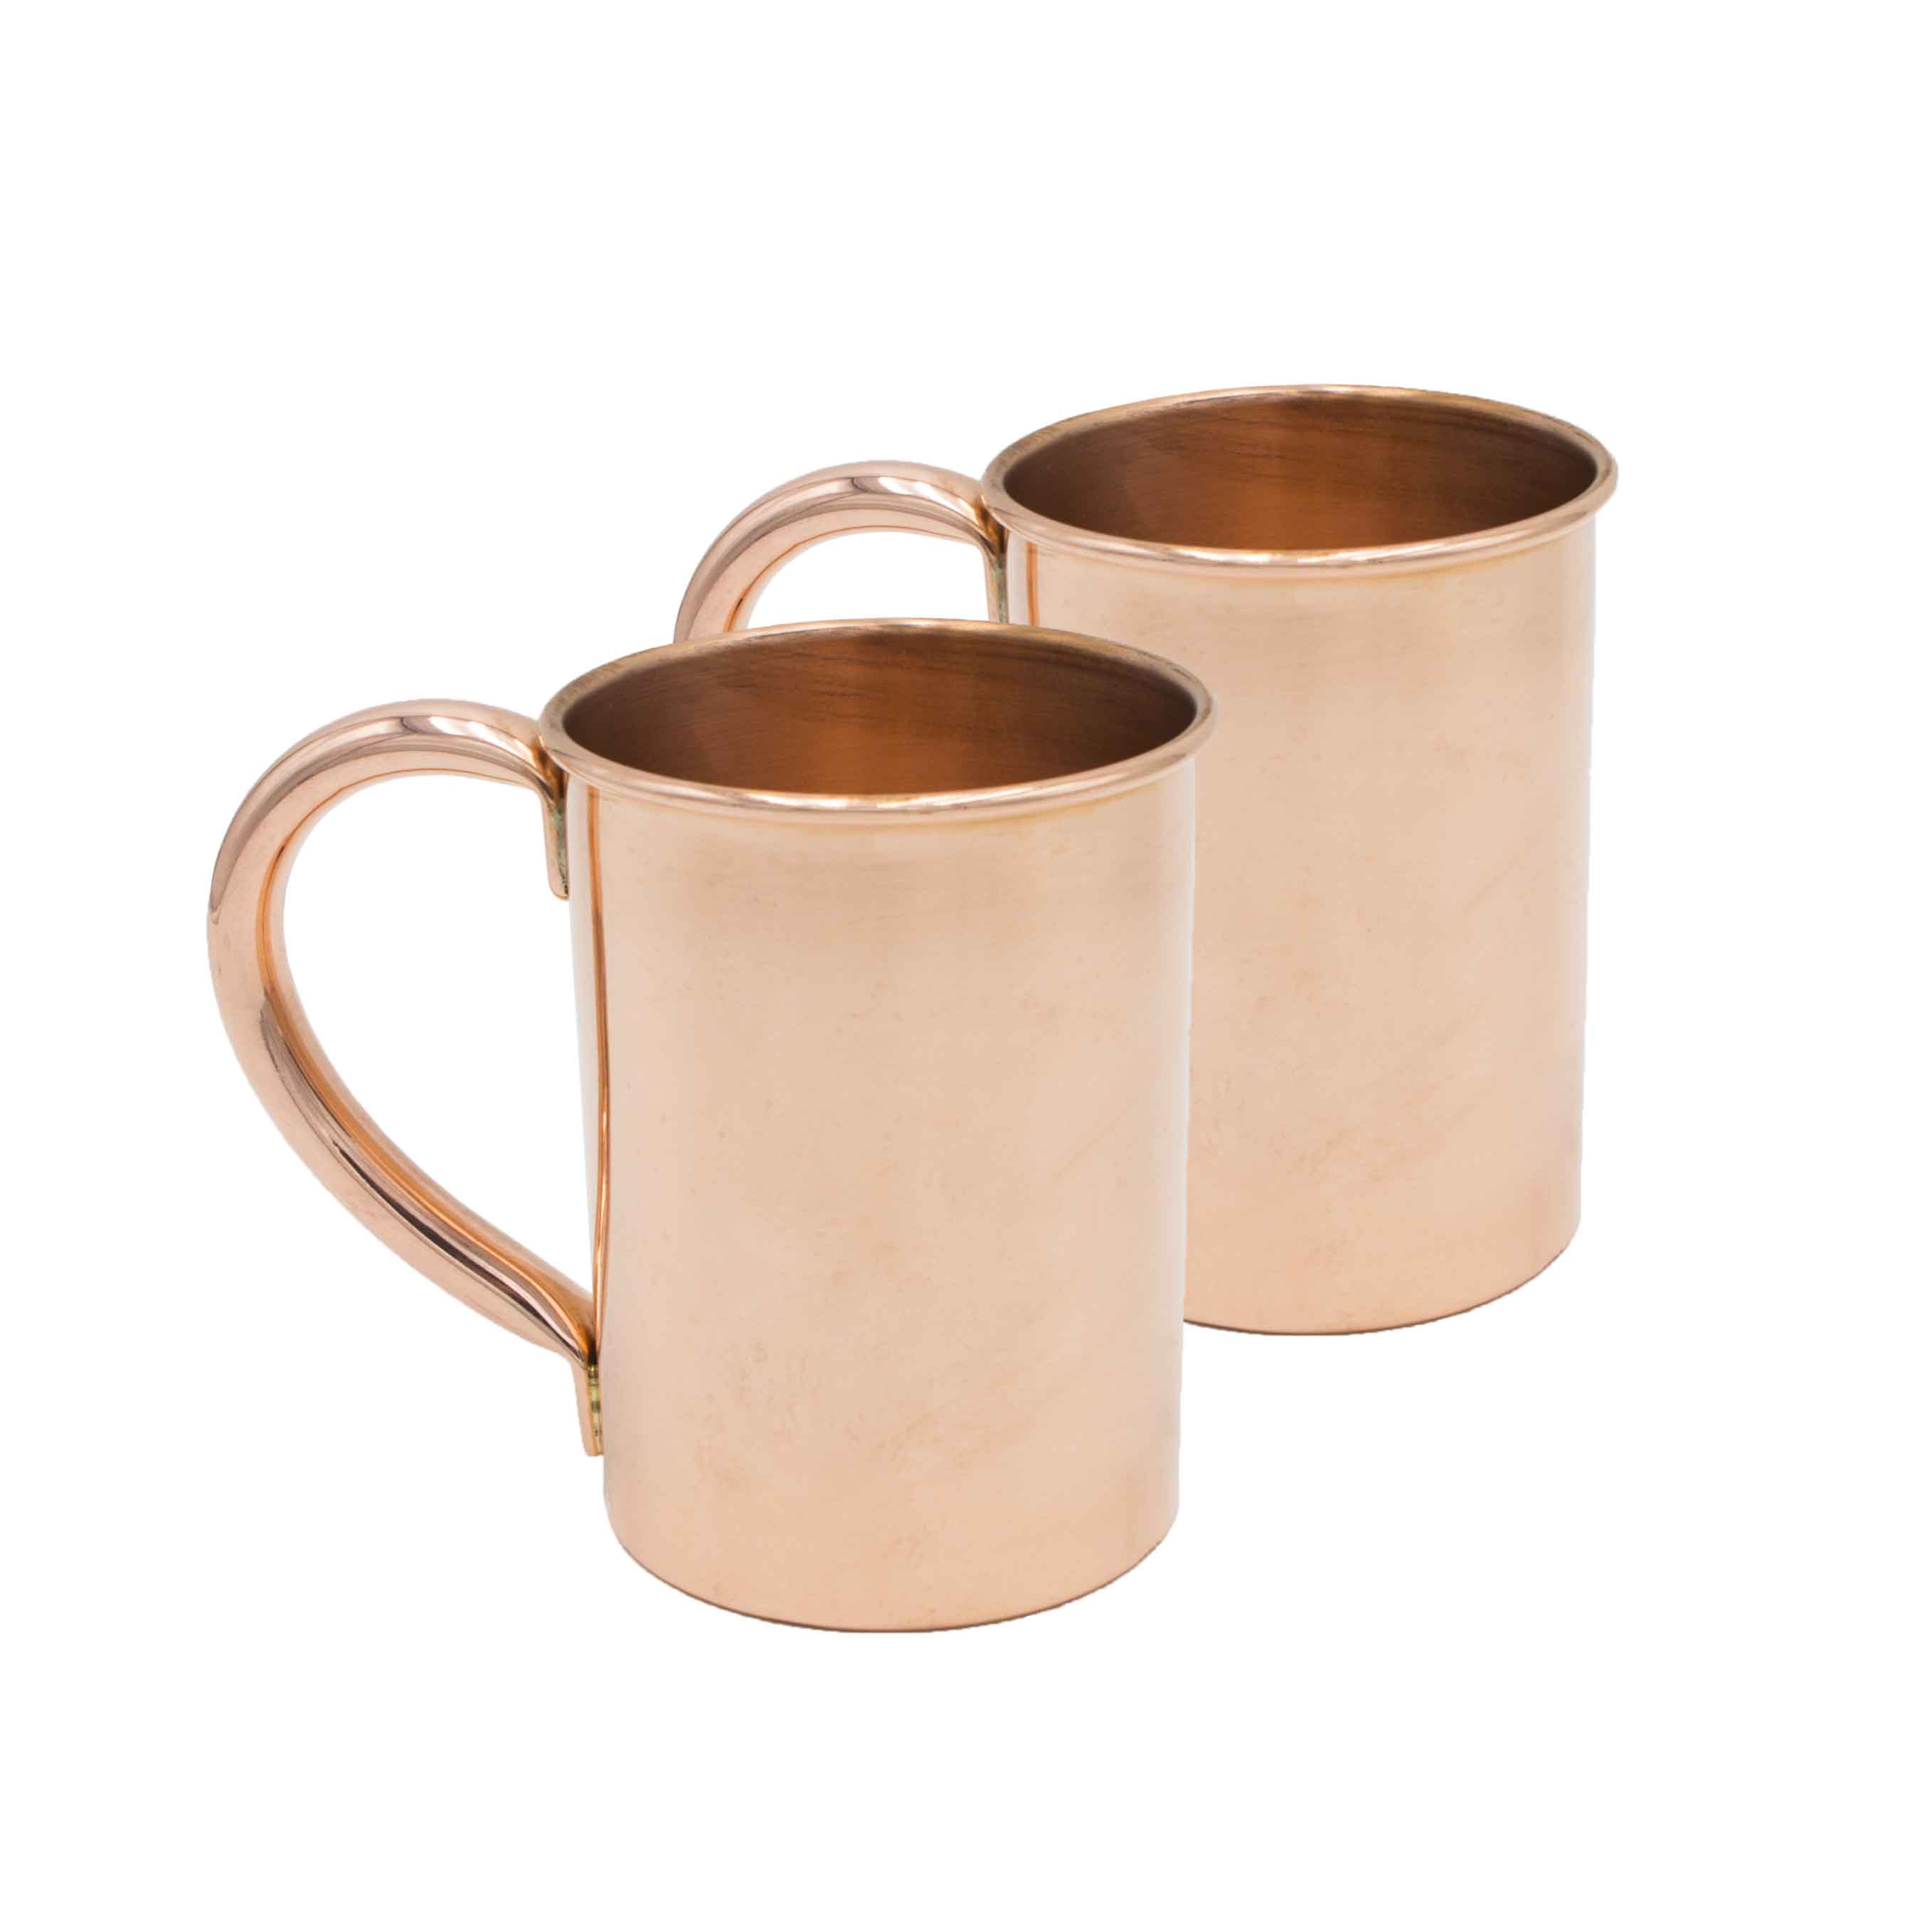 Pure Copper Beer Mugs Unique Tankard Look Handmade Solid and Pure Copper Beer Stein No Lining Ice Cold Beer Moscow Mules Capacity 20 Ounce 